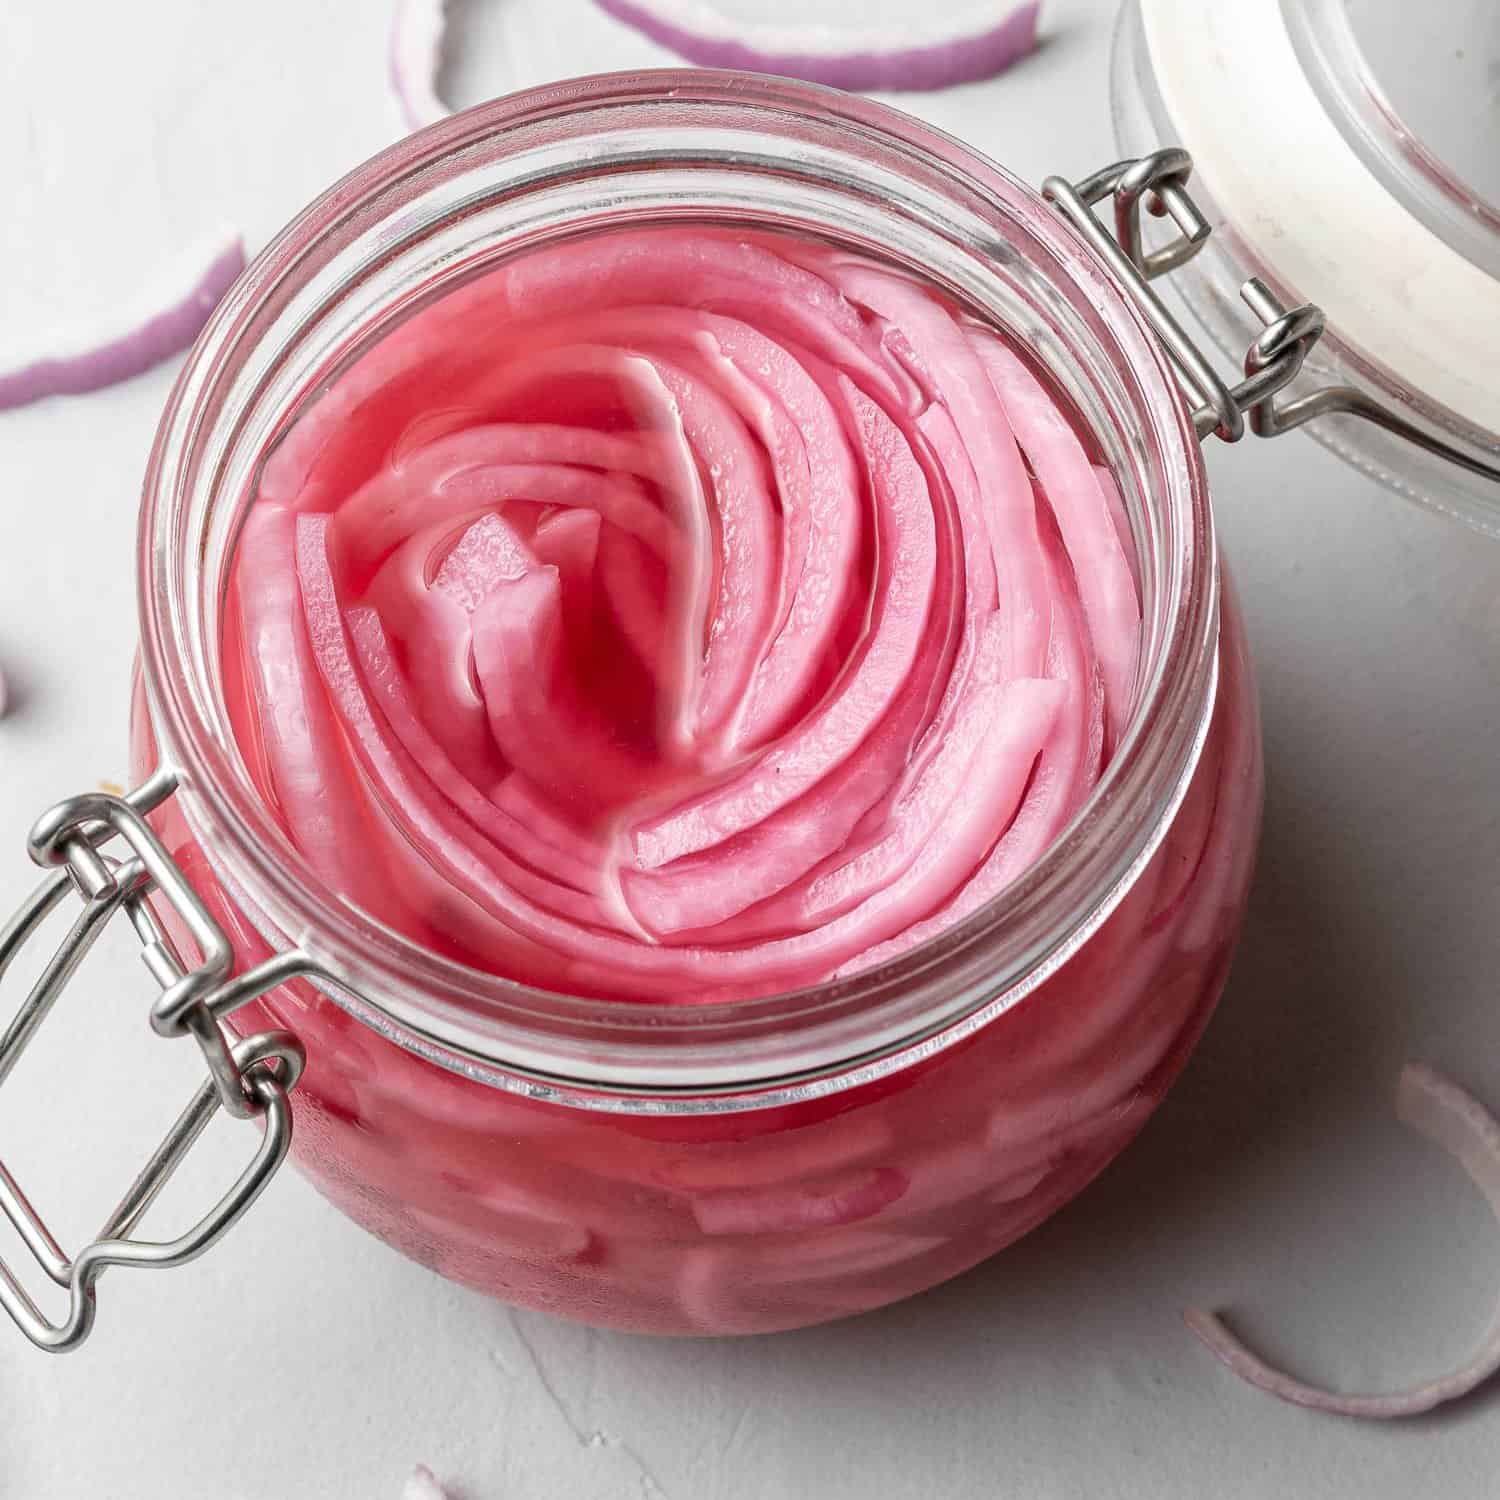 https://www.rachelcooks.com/wp-content/uploads/2022/01/pickled-red-onions-1500-12-square.jpg